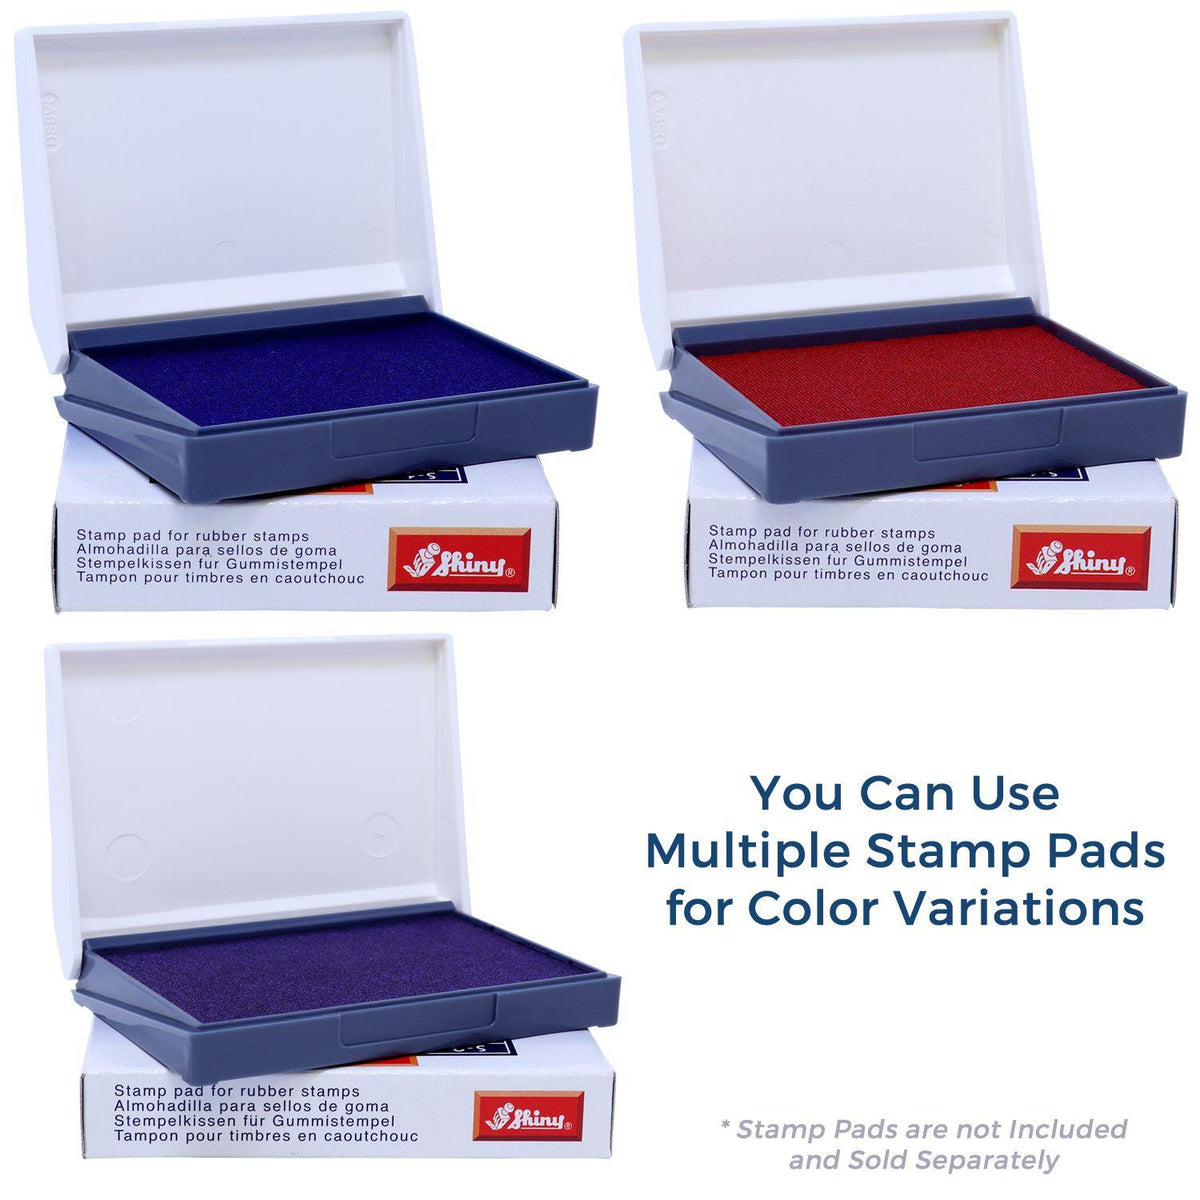 Stamp Pads for Large Por Avion Rubber Stamp Available